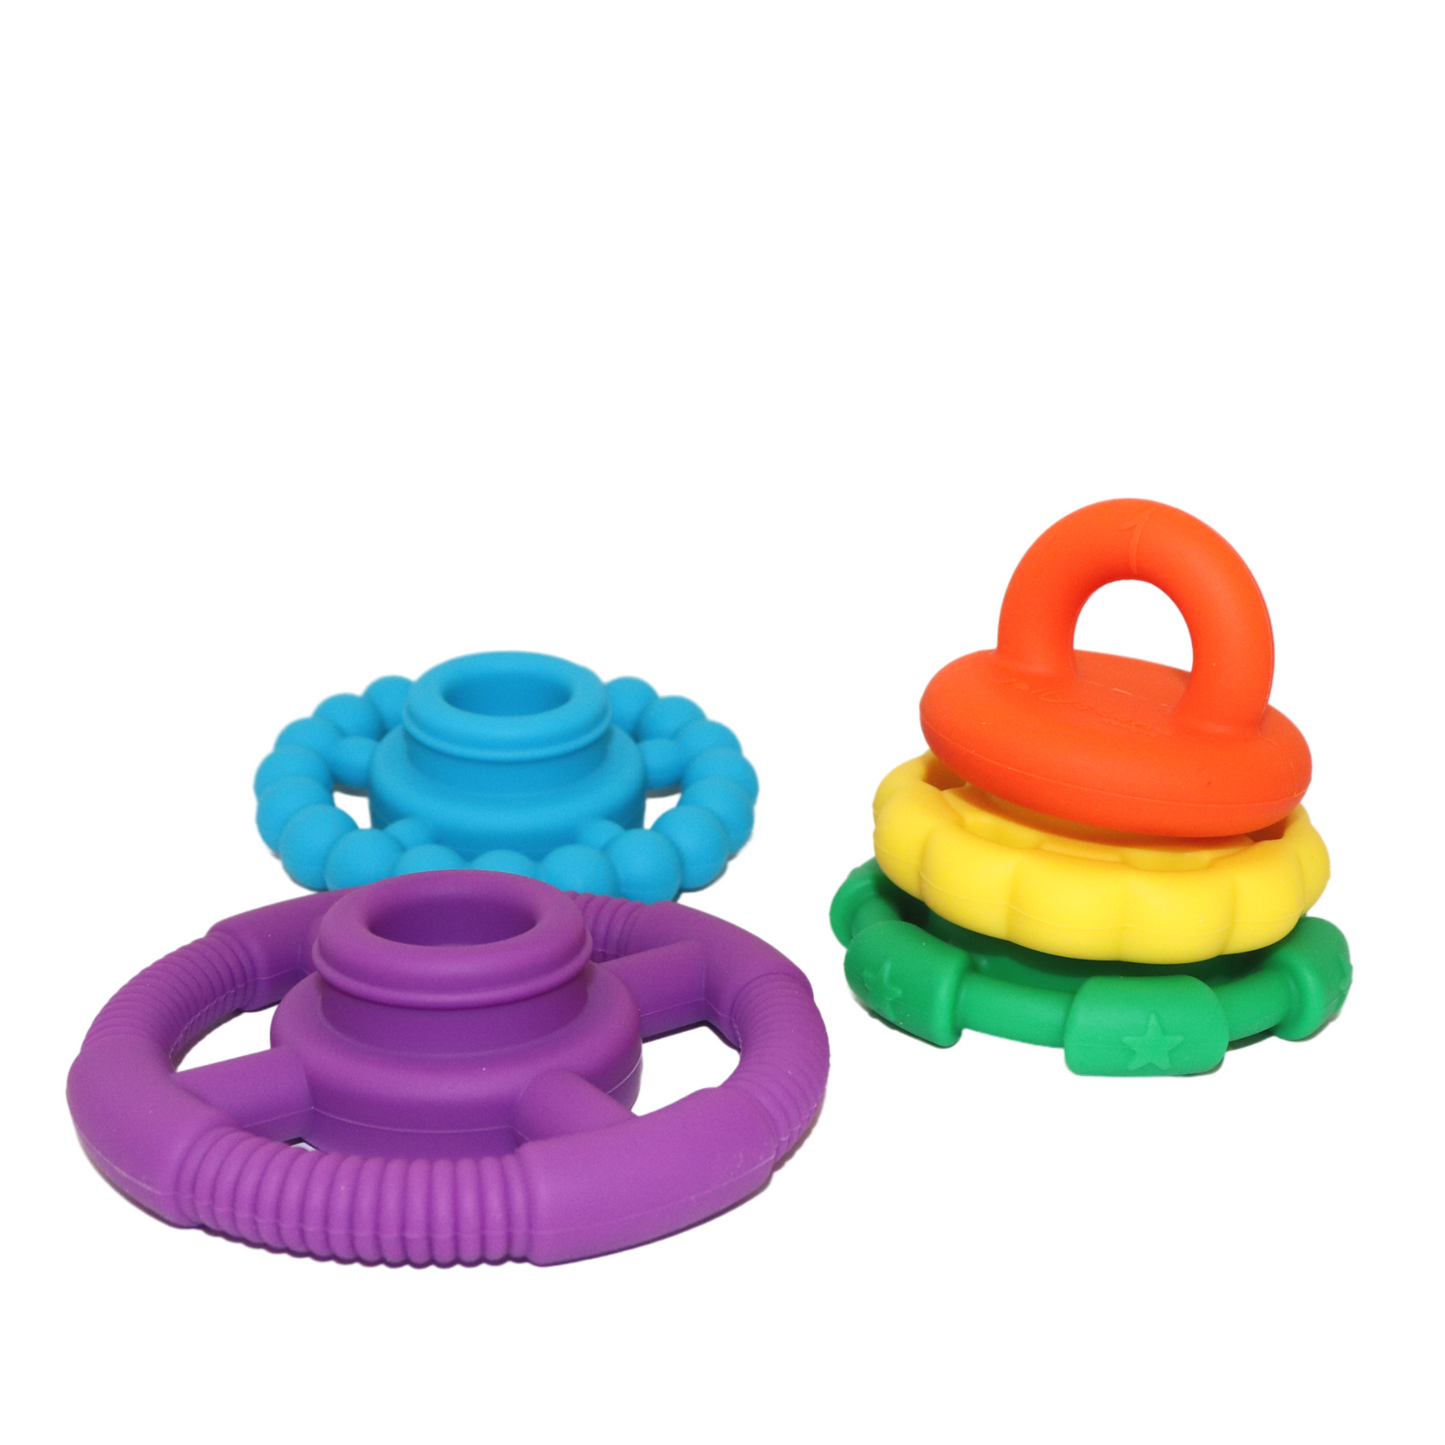 Good Teething Toys For Babies